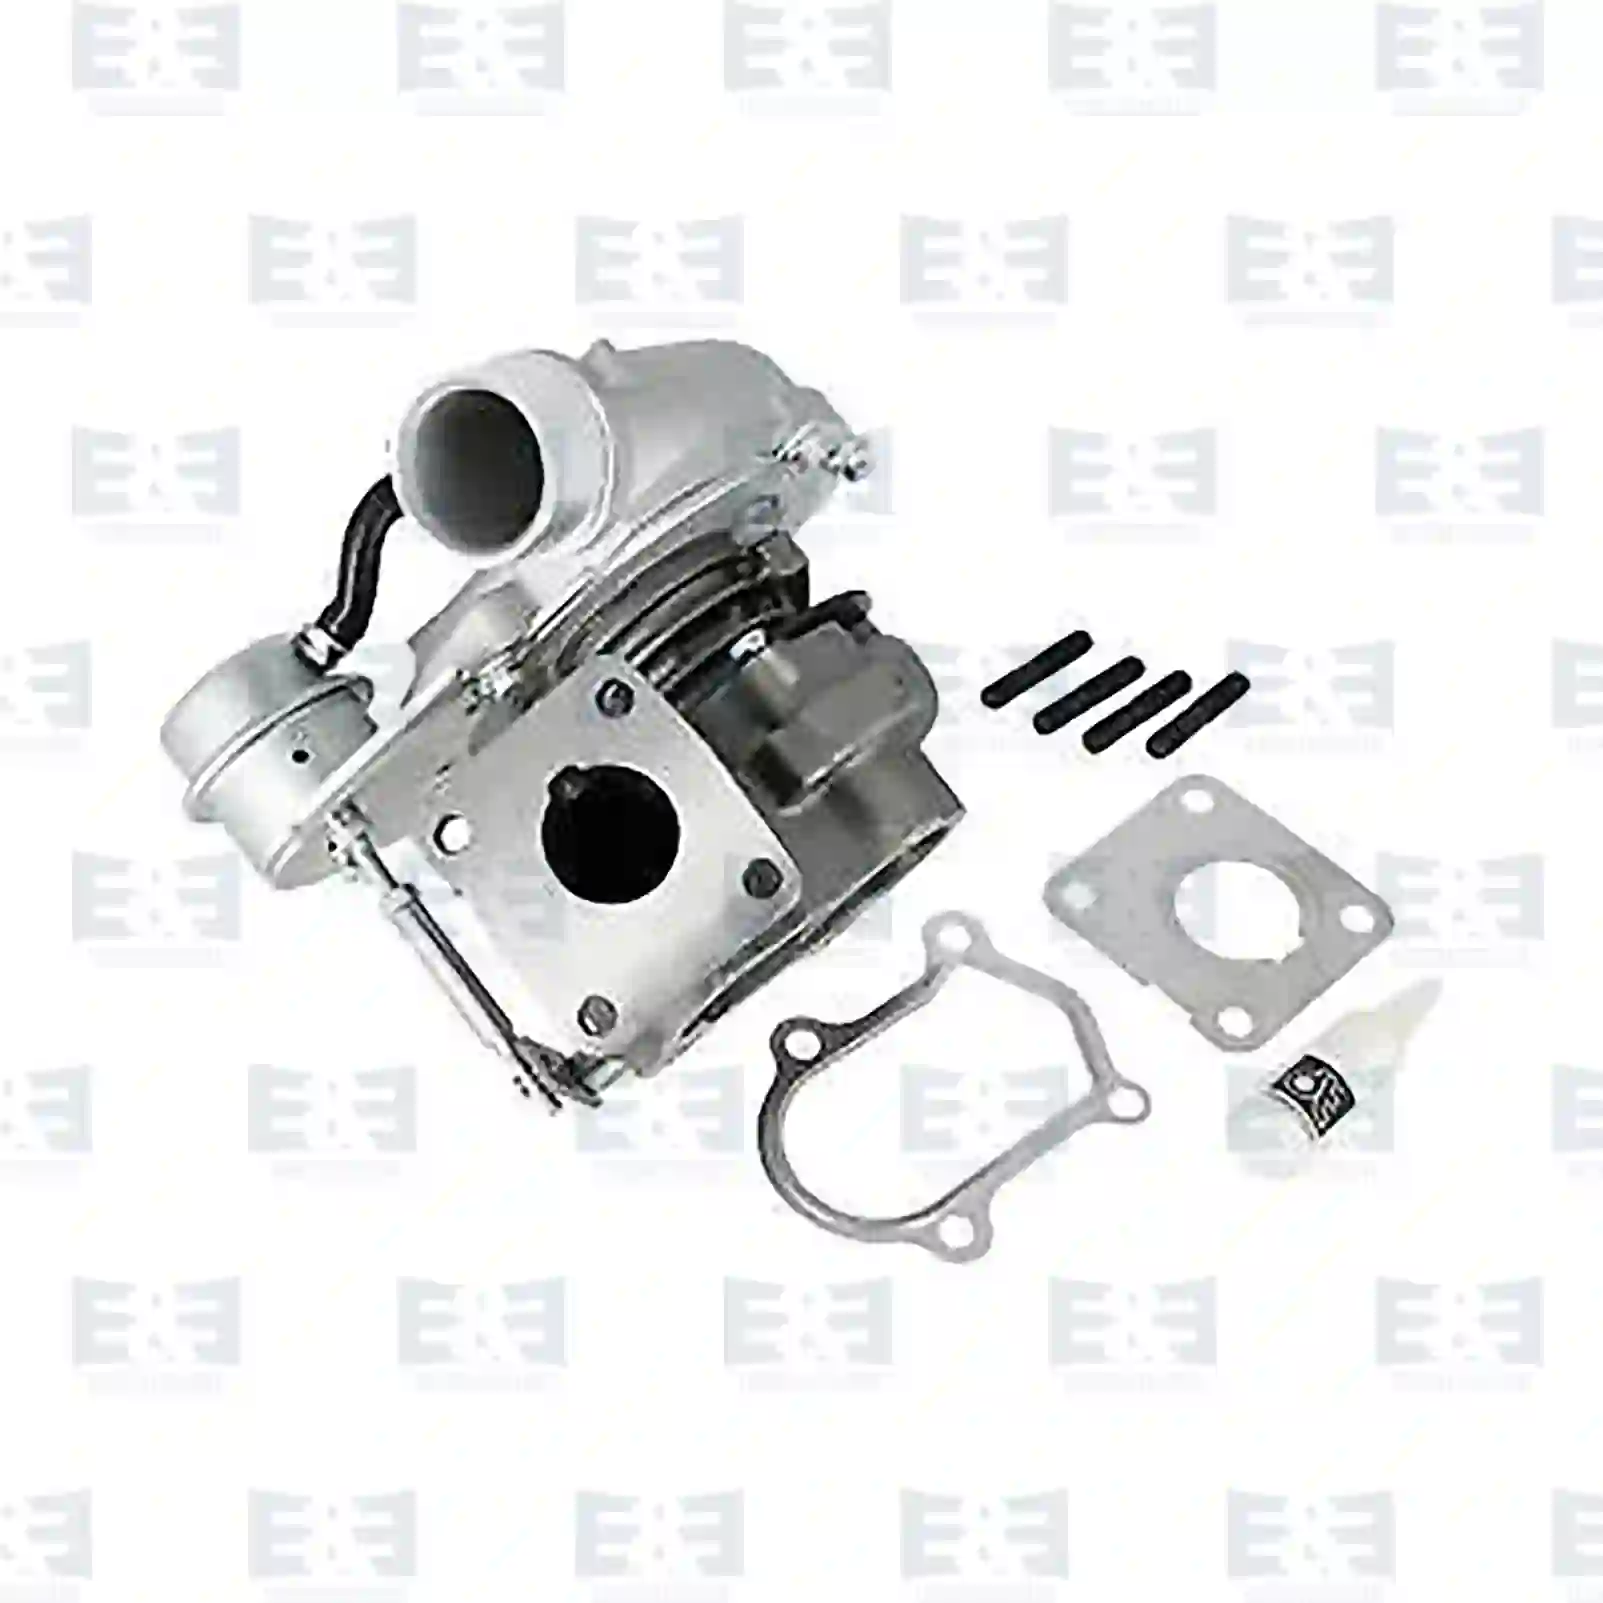 Turbocharger Turbocharger, without gasket kit, EE No 2E2200766 ,  oem no:0375F6, 0962143720, 04500939, 4500939, 46234479, 500314776, 500344800, 500344801, 500364493, 500385898, 71723501, 71723503, 71723558, 71723560, 962143720, 99460981, 99466793, 71723558, 9161239, 93184040, 99460981, 500321799, 500344801, 500385898, 99450704, 99460981, 99466793, 4500939, 860077, 0375F6, 0962143720, 0004500939, 0009161239, 5001859132, 7701044612, 7711135840 E&E Truck Spare Parts | Truck Spare Parts, Auotomotive Spare Parts